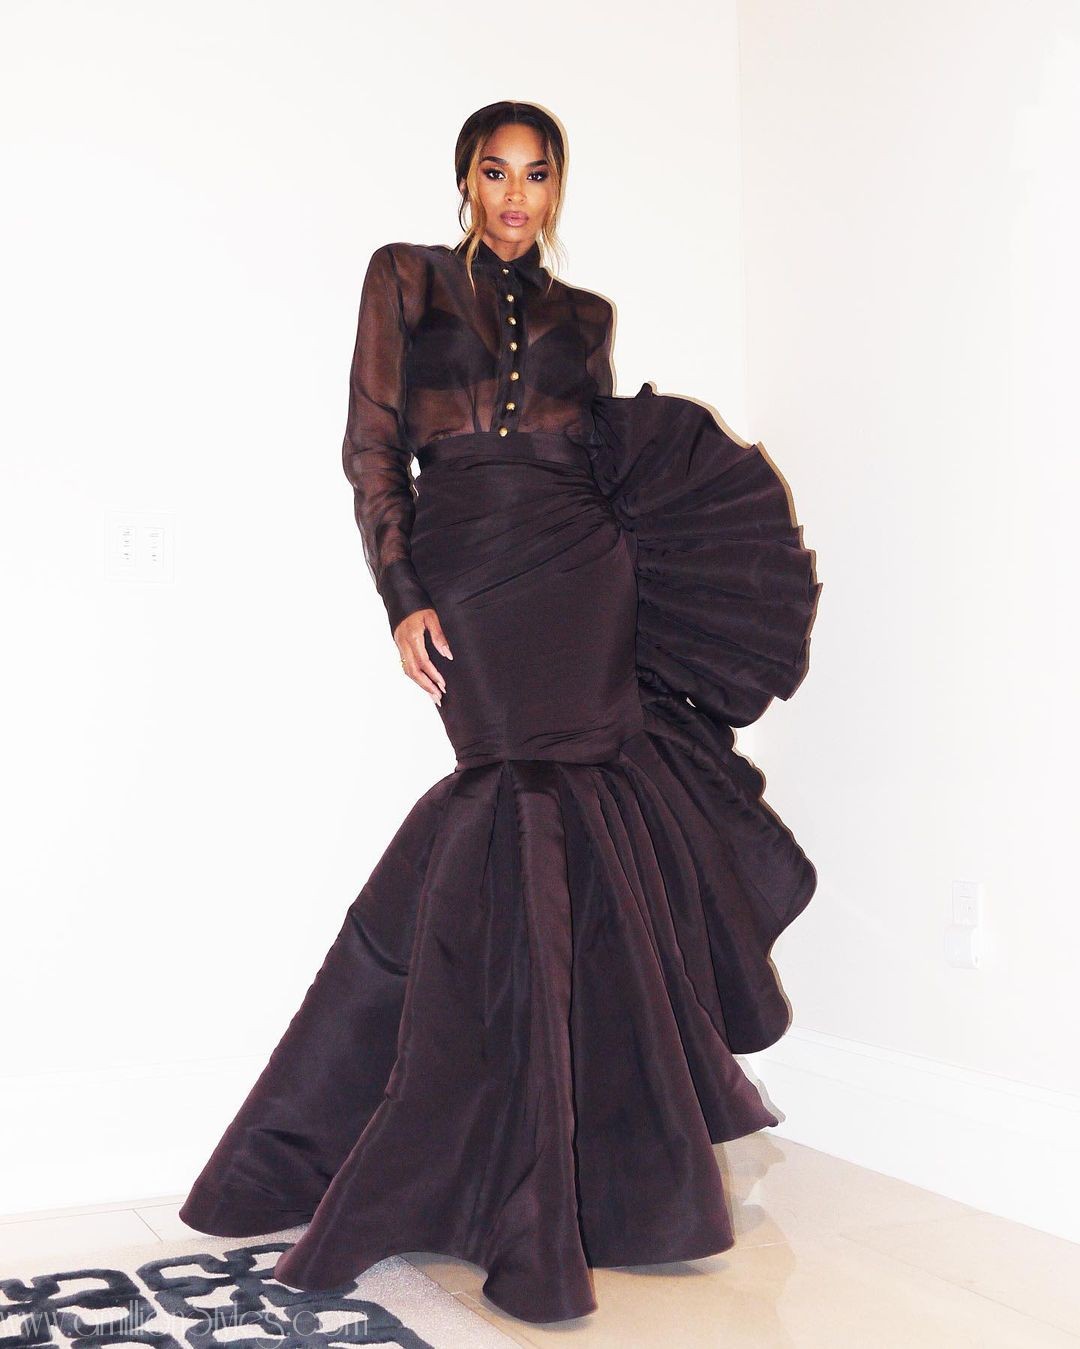 Ciara Looked Simple But Stunning For The Baby2Baby 10 Year Gala